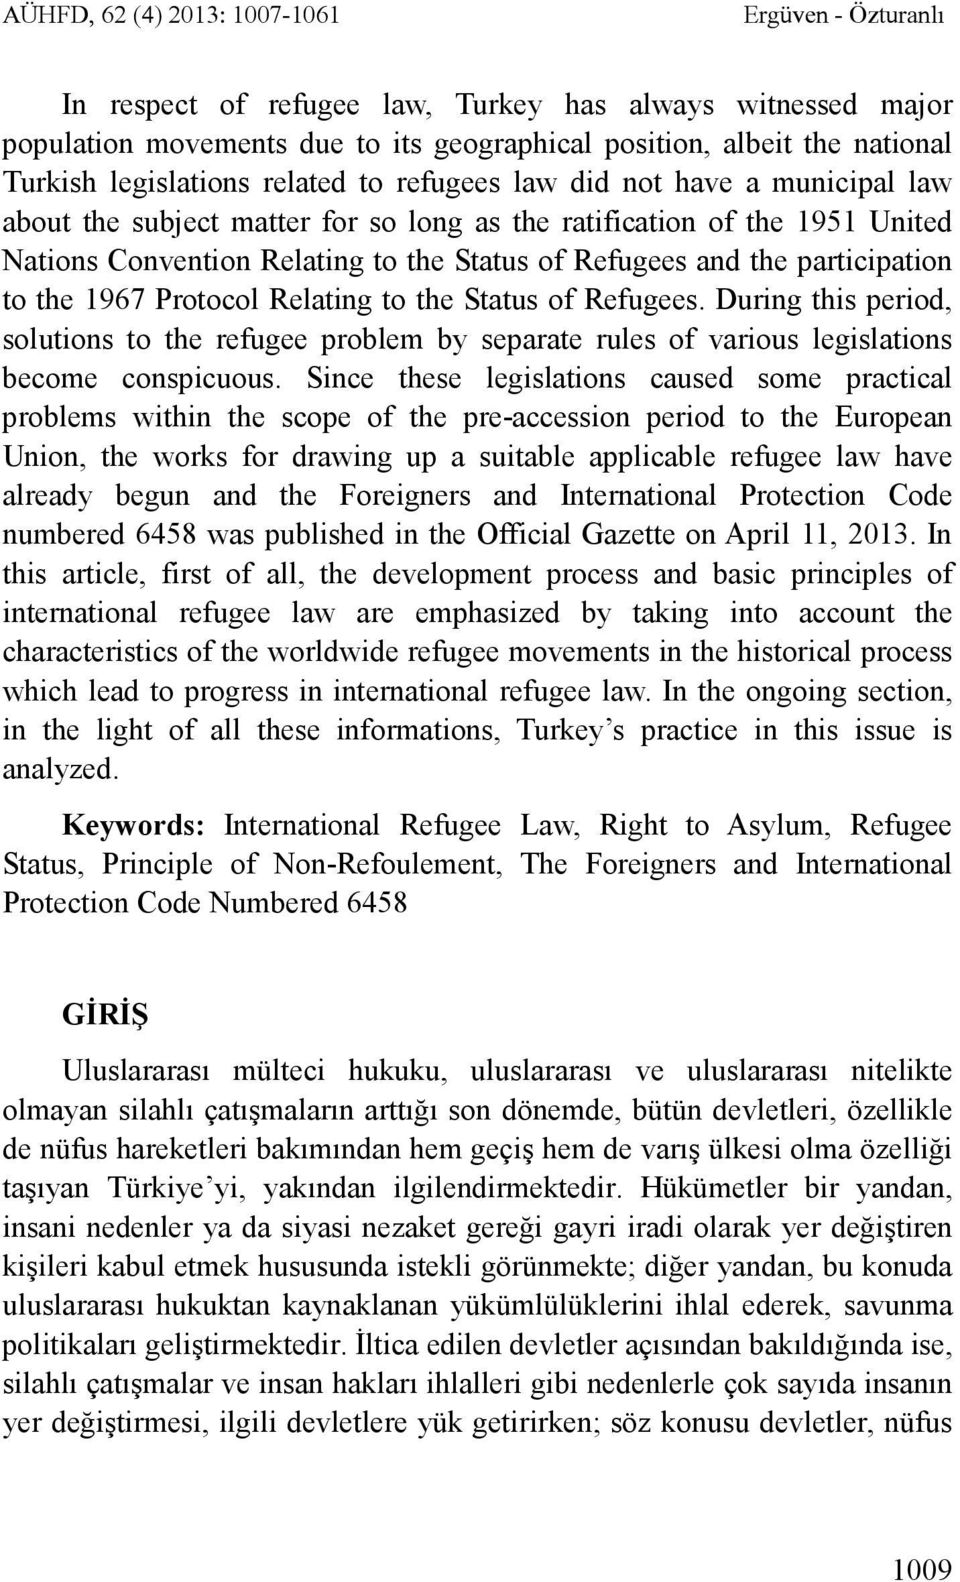 the participation to the 1967 Protocol Relating to the Status of Refugees. During this period, solutions to the refugee problem by separate rules of various legislations become conspicuous.